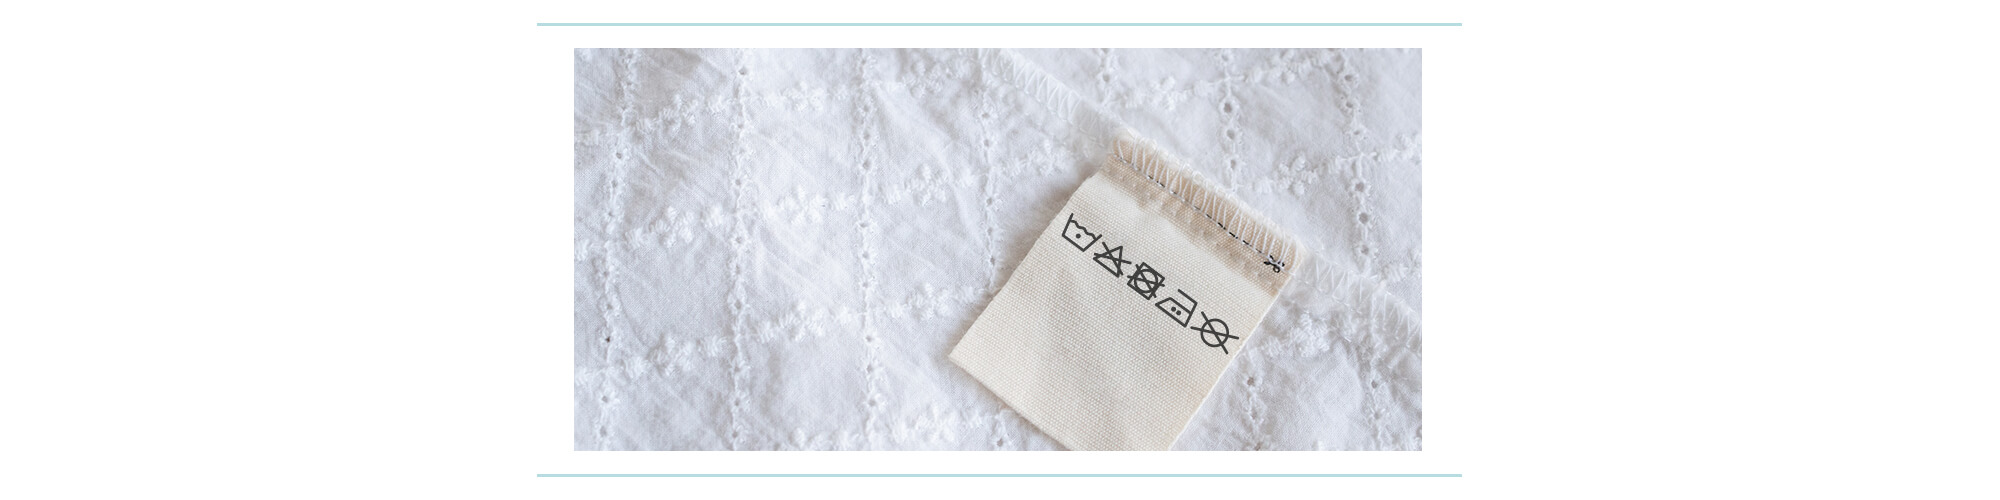 A laundry care tag with symbols on it sewn into a white eyelet piece of fabric